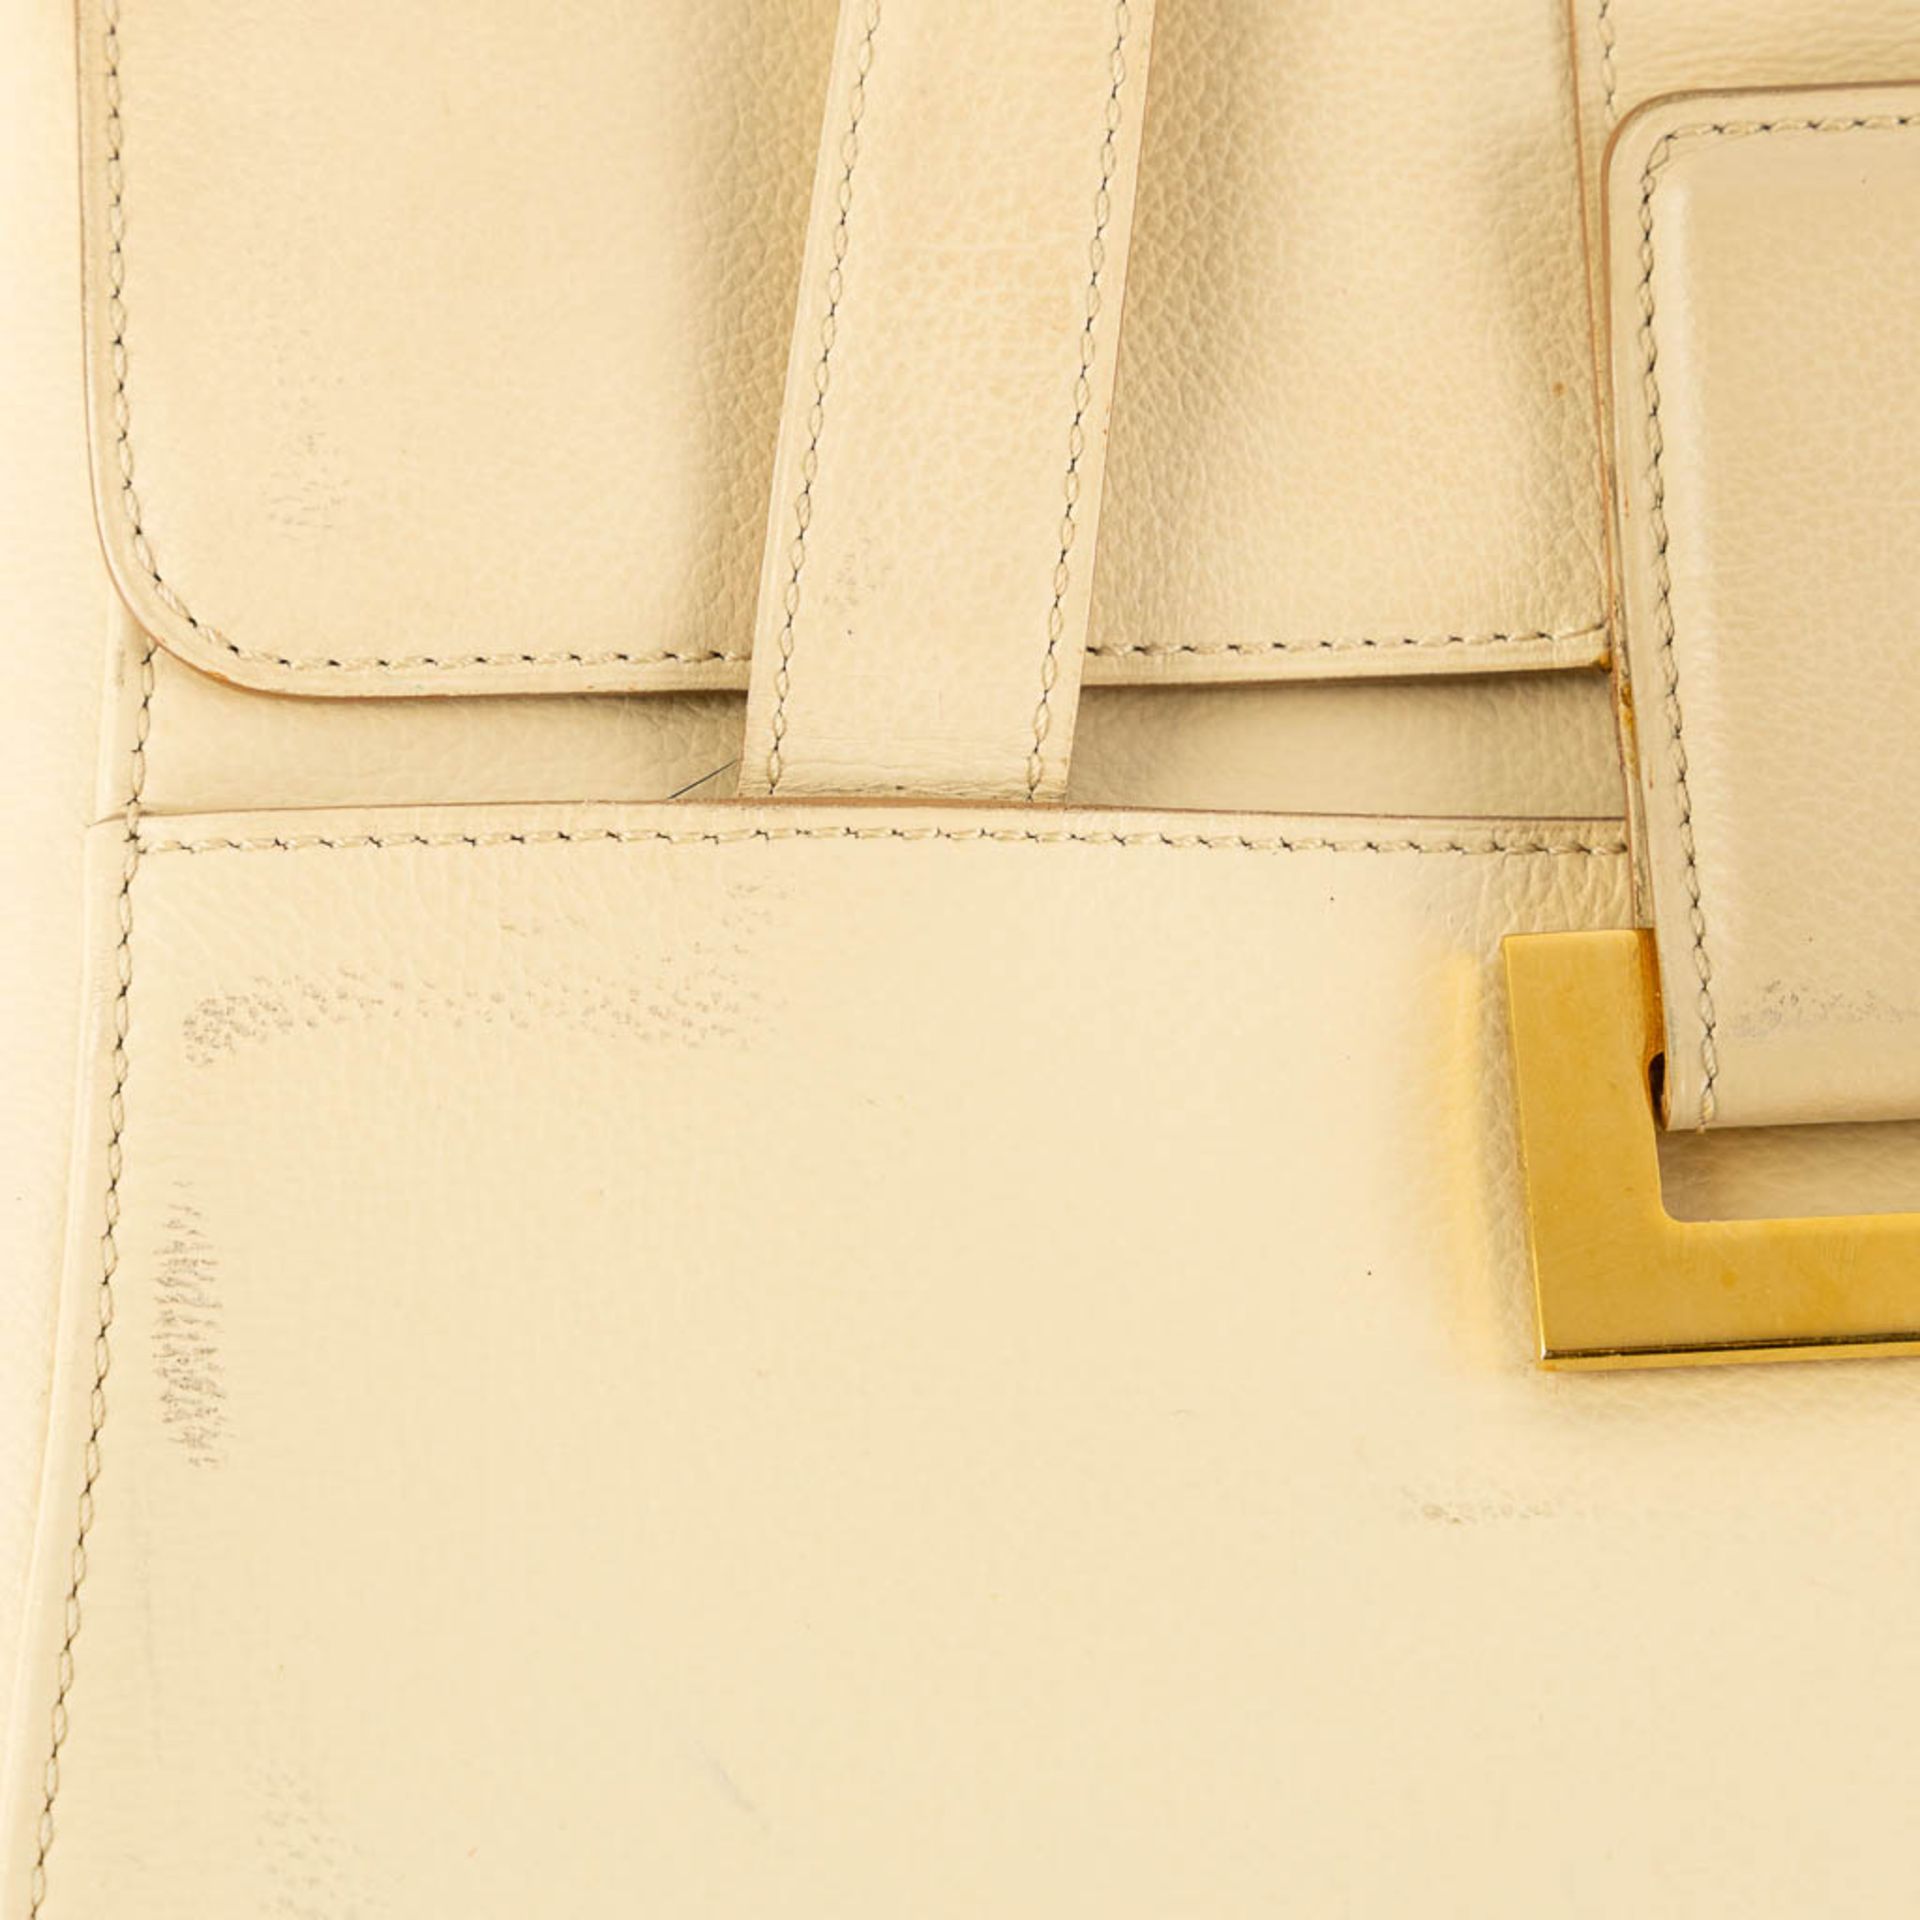 Delvaux model 'Reverie' Jumping, Ivoire. Ivory coloured leather. (L:11 x W:28 x H:23 cm) - Image 11 of 20